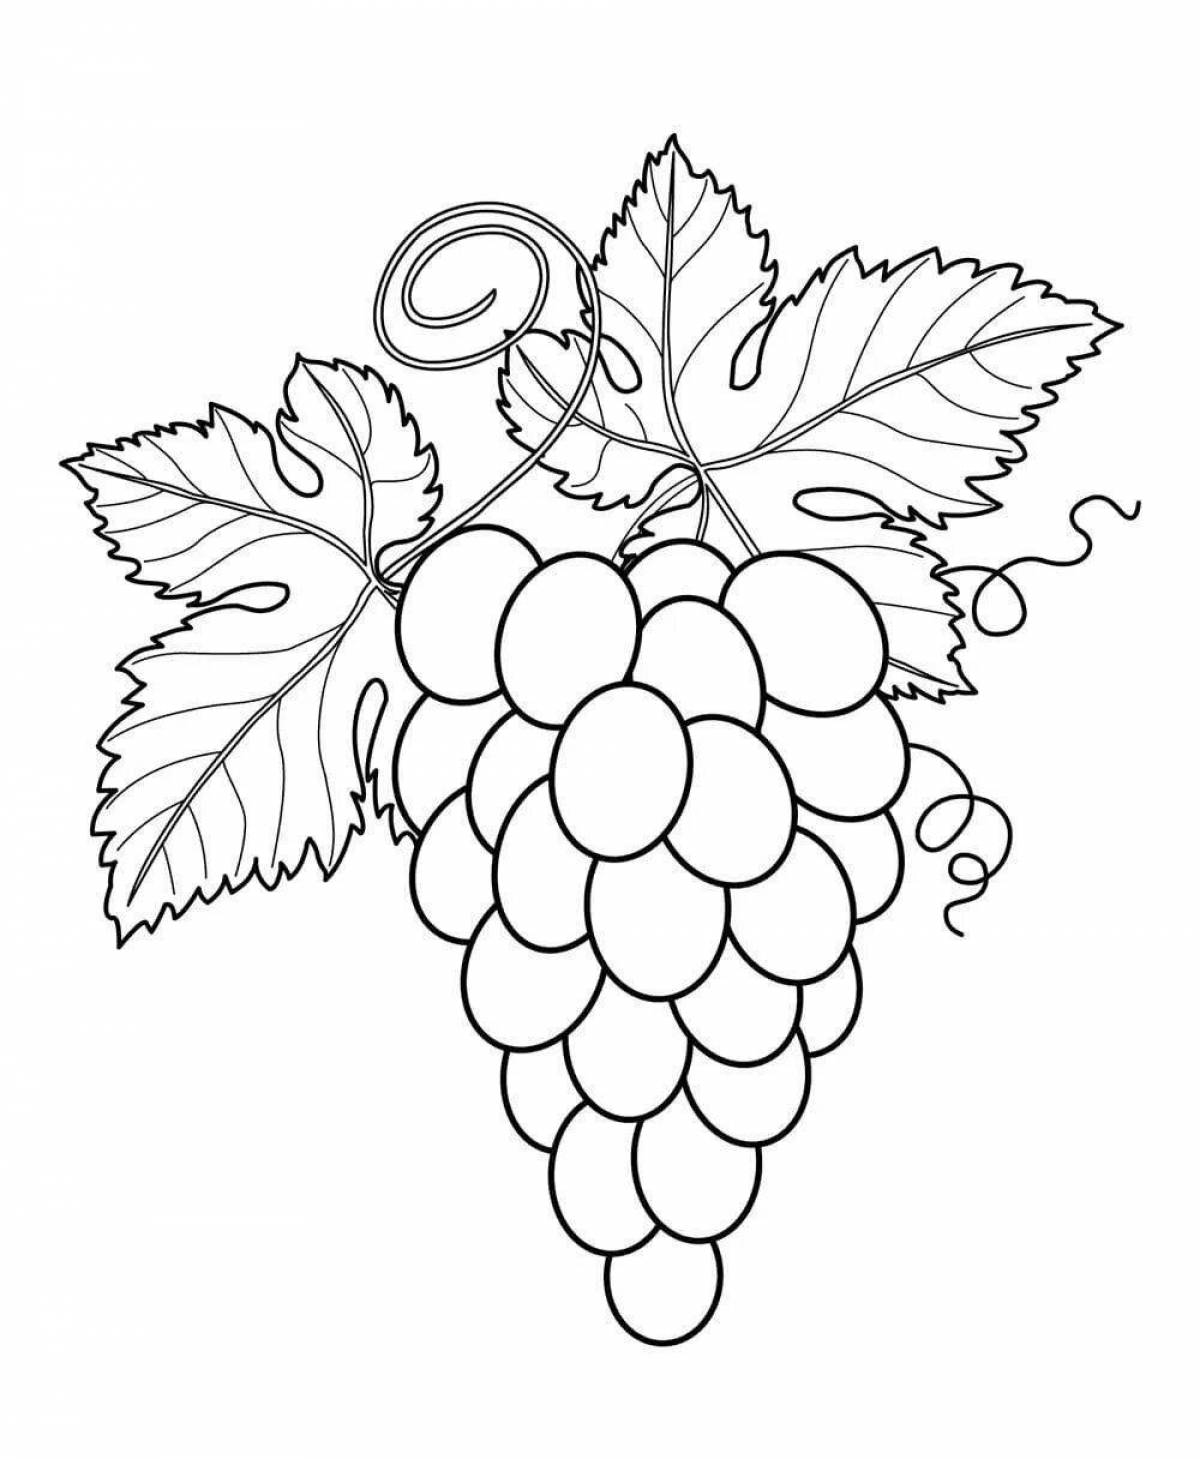 Delicious berries and fruits coloring book